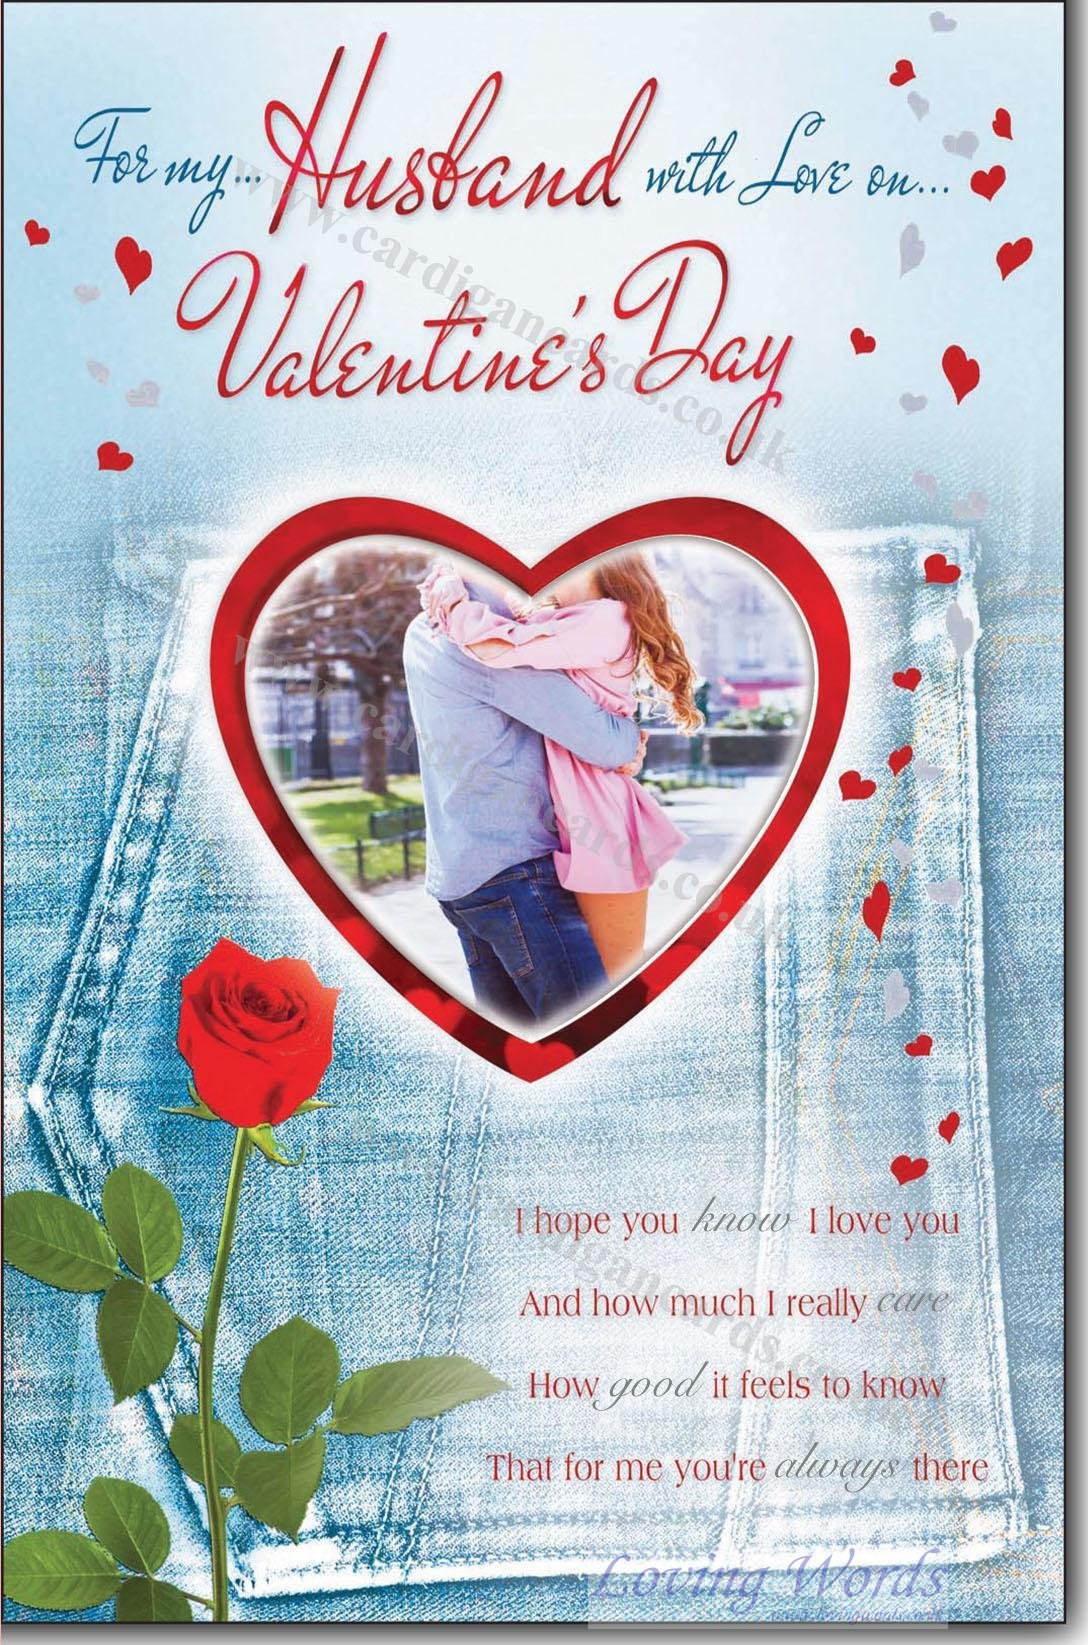 husband-on-valentine-s-day-greeting-cards-by-loving-words